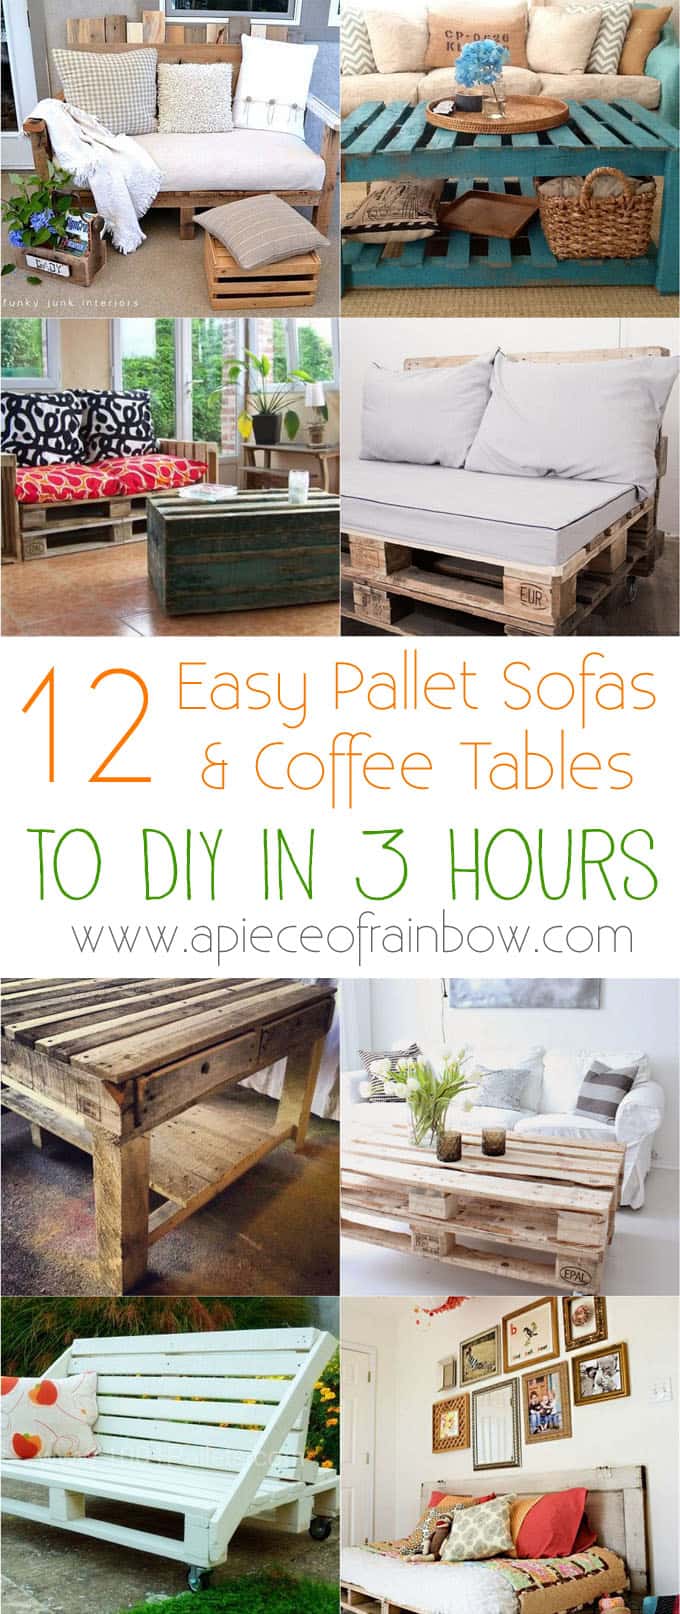 20 Easy Pallet Sofas and Coffee Tables to DIY in One Afternoon   A ...